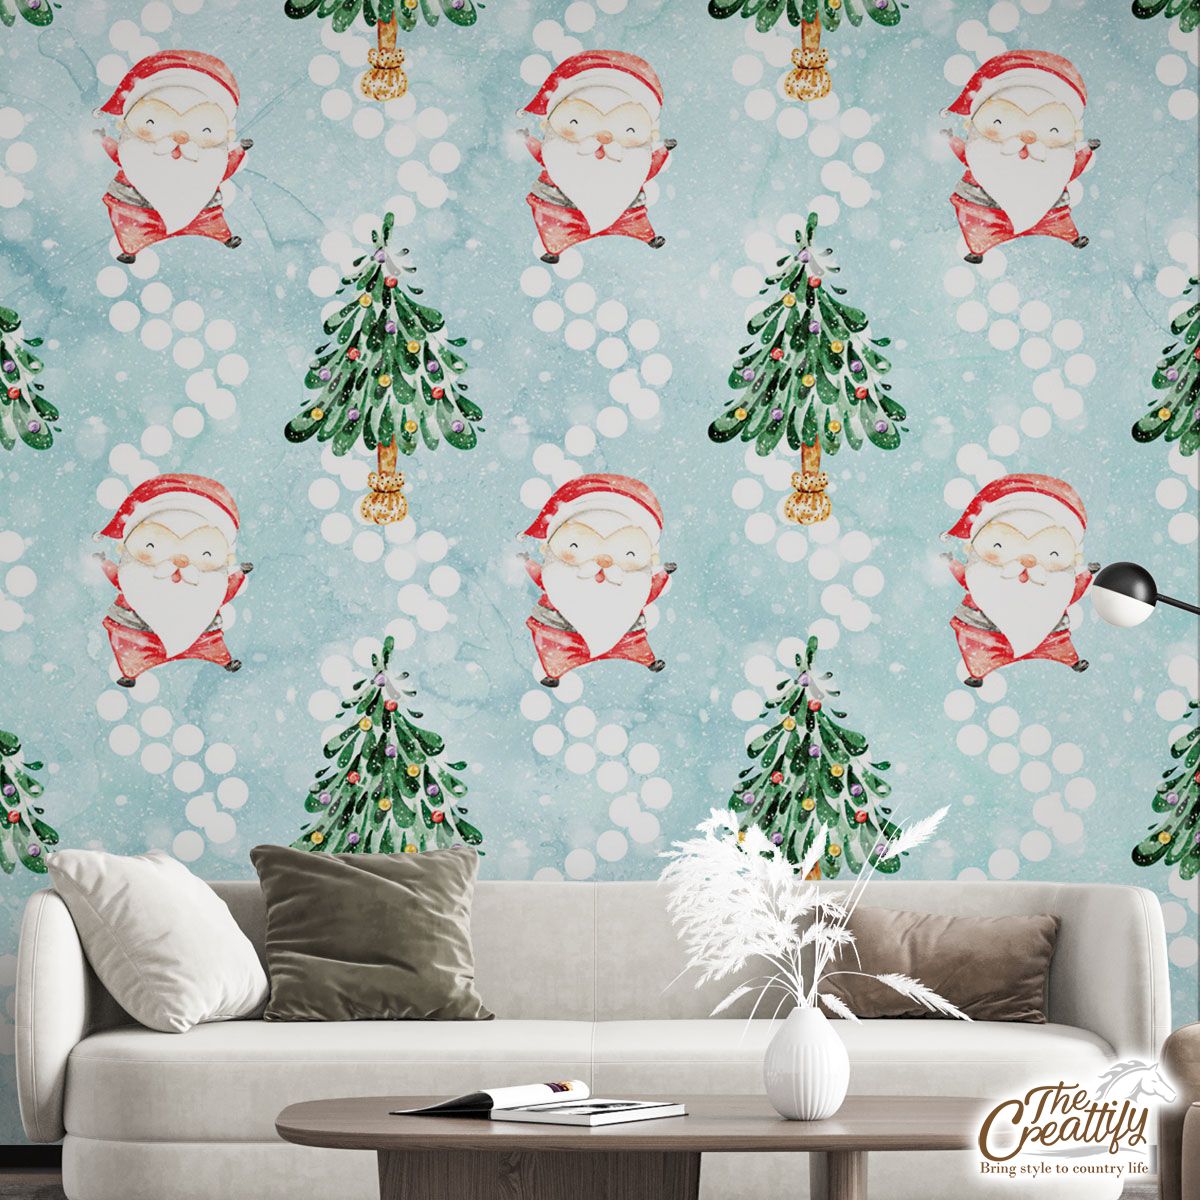 Santa Clause And Christmas Tree On Snowflake Background Wall Mural